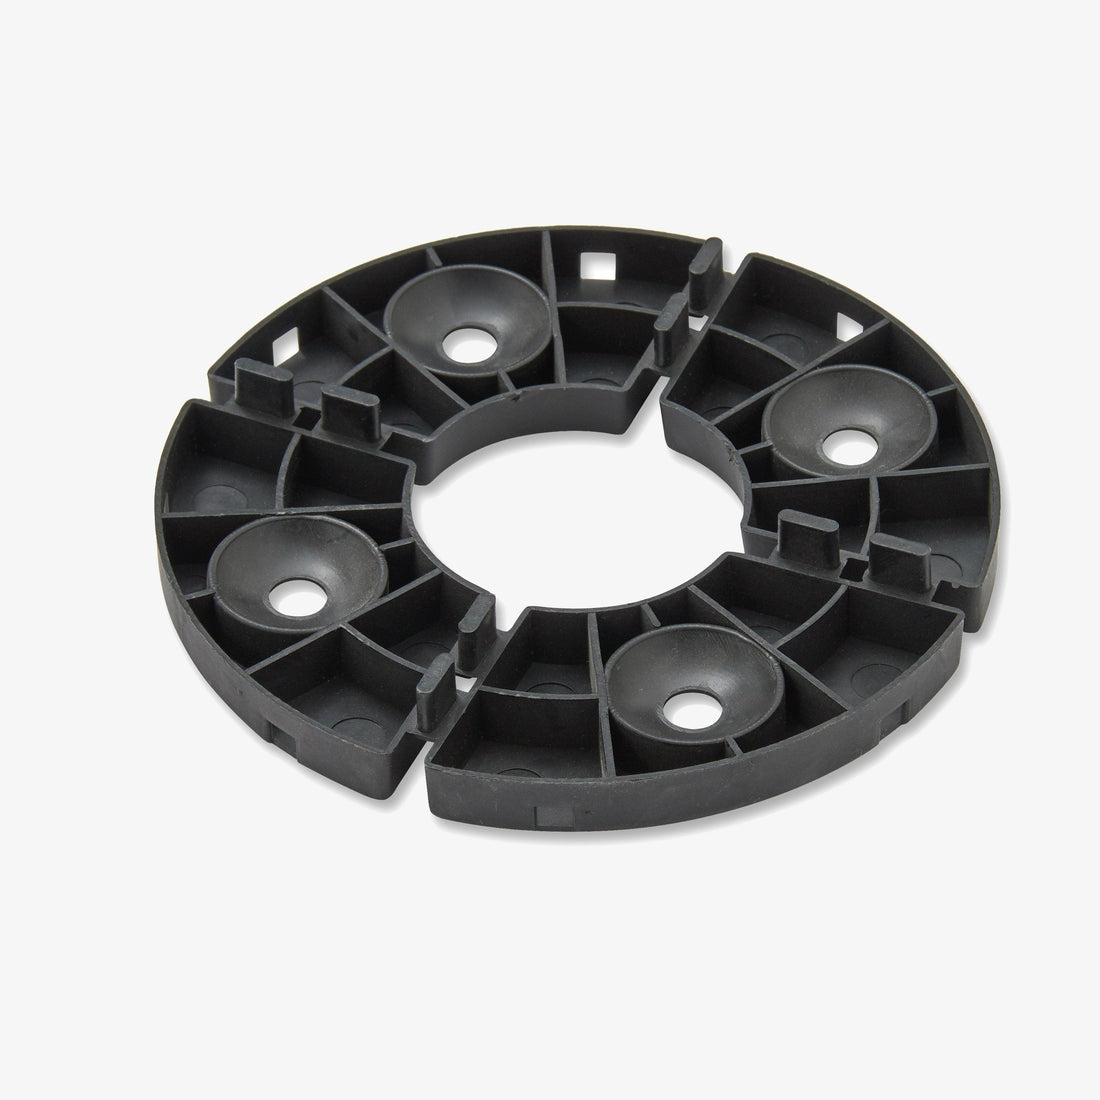 12mm Support Pad